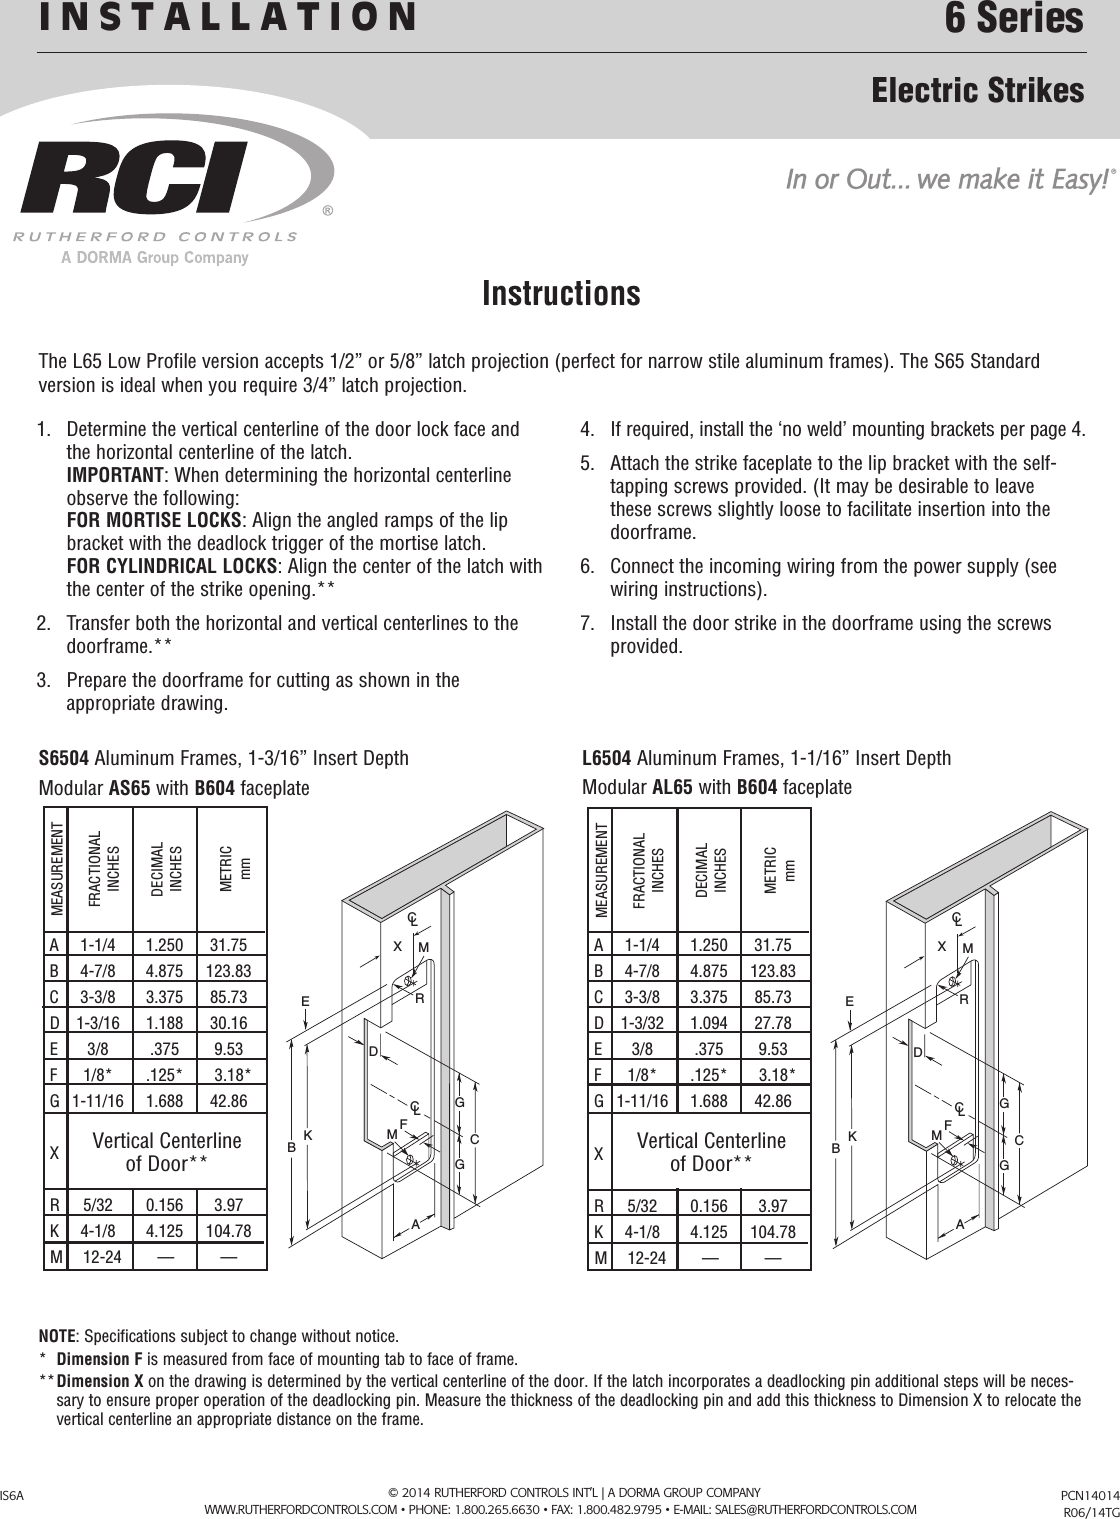 Page 1 of 6 - RCI  6 Series/7 Series Installation Instructions IS6A R0614